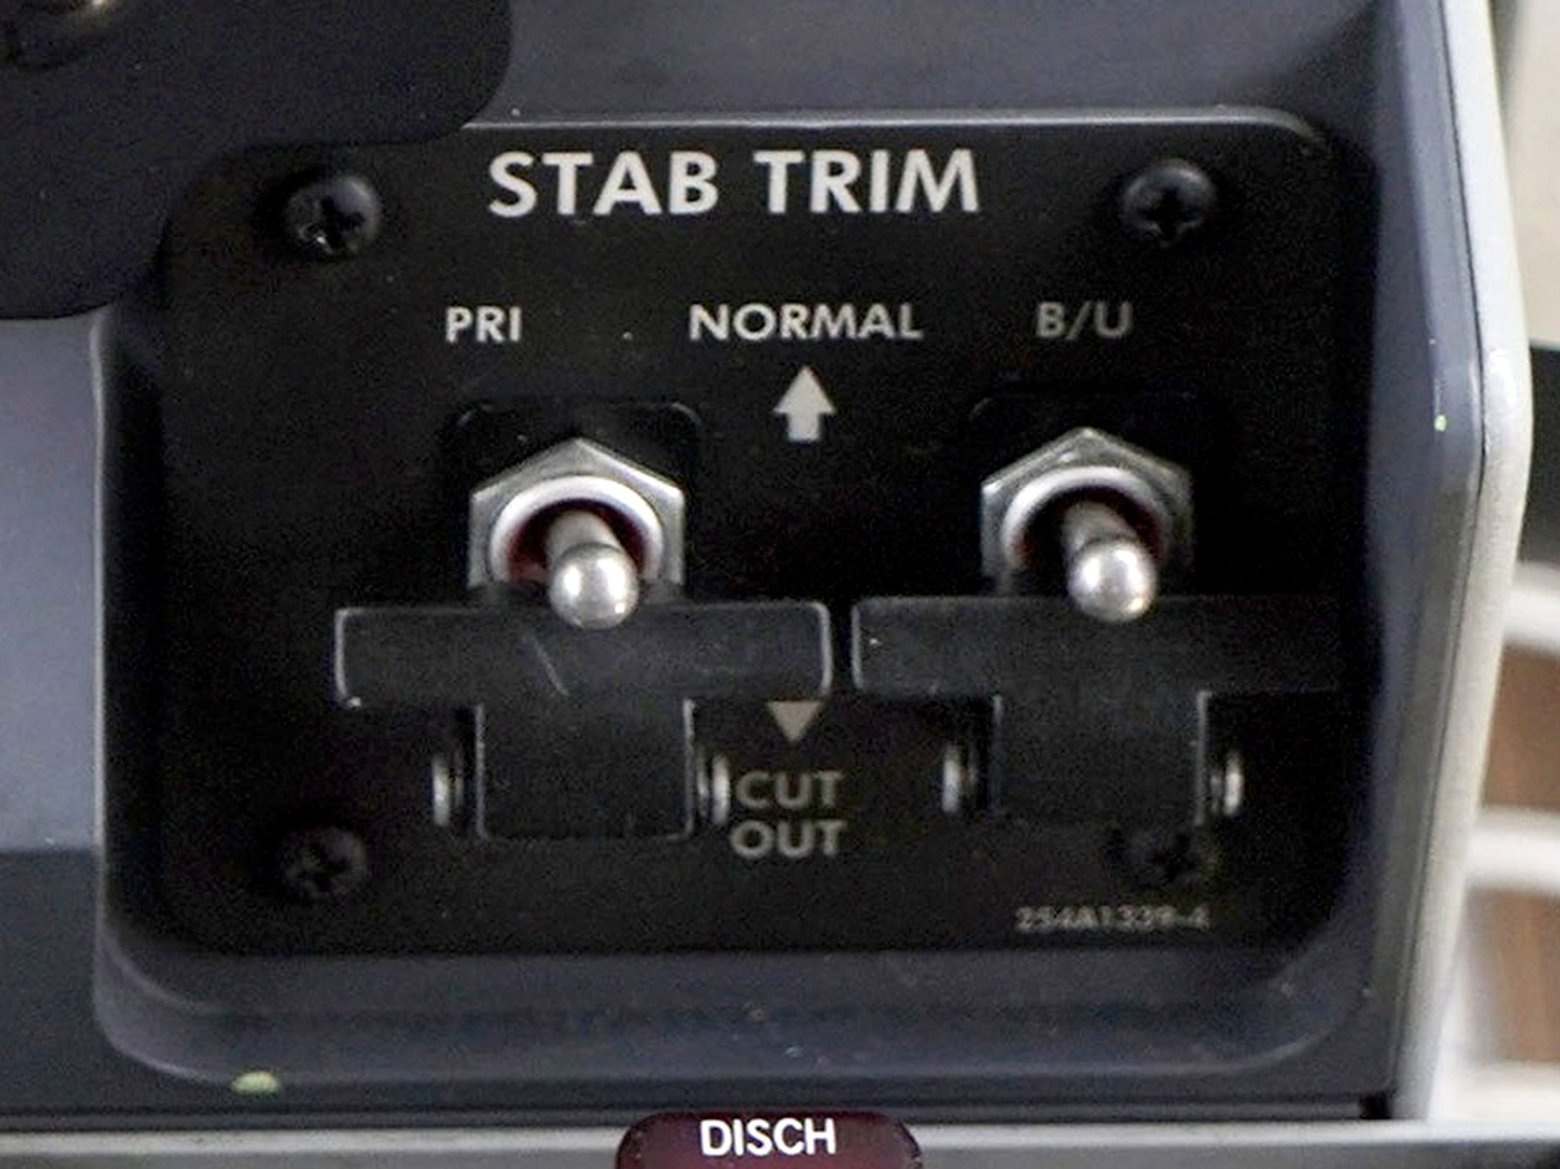 Two switches next to each other, labeled STAB TRIM